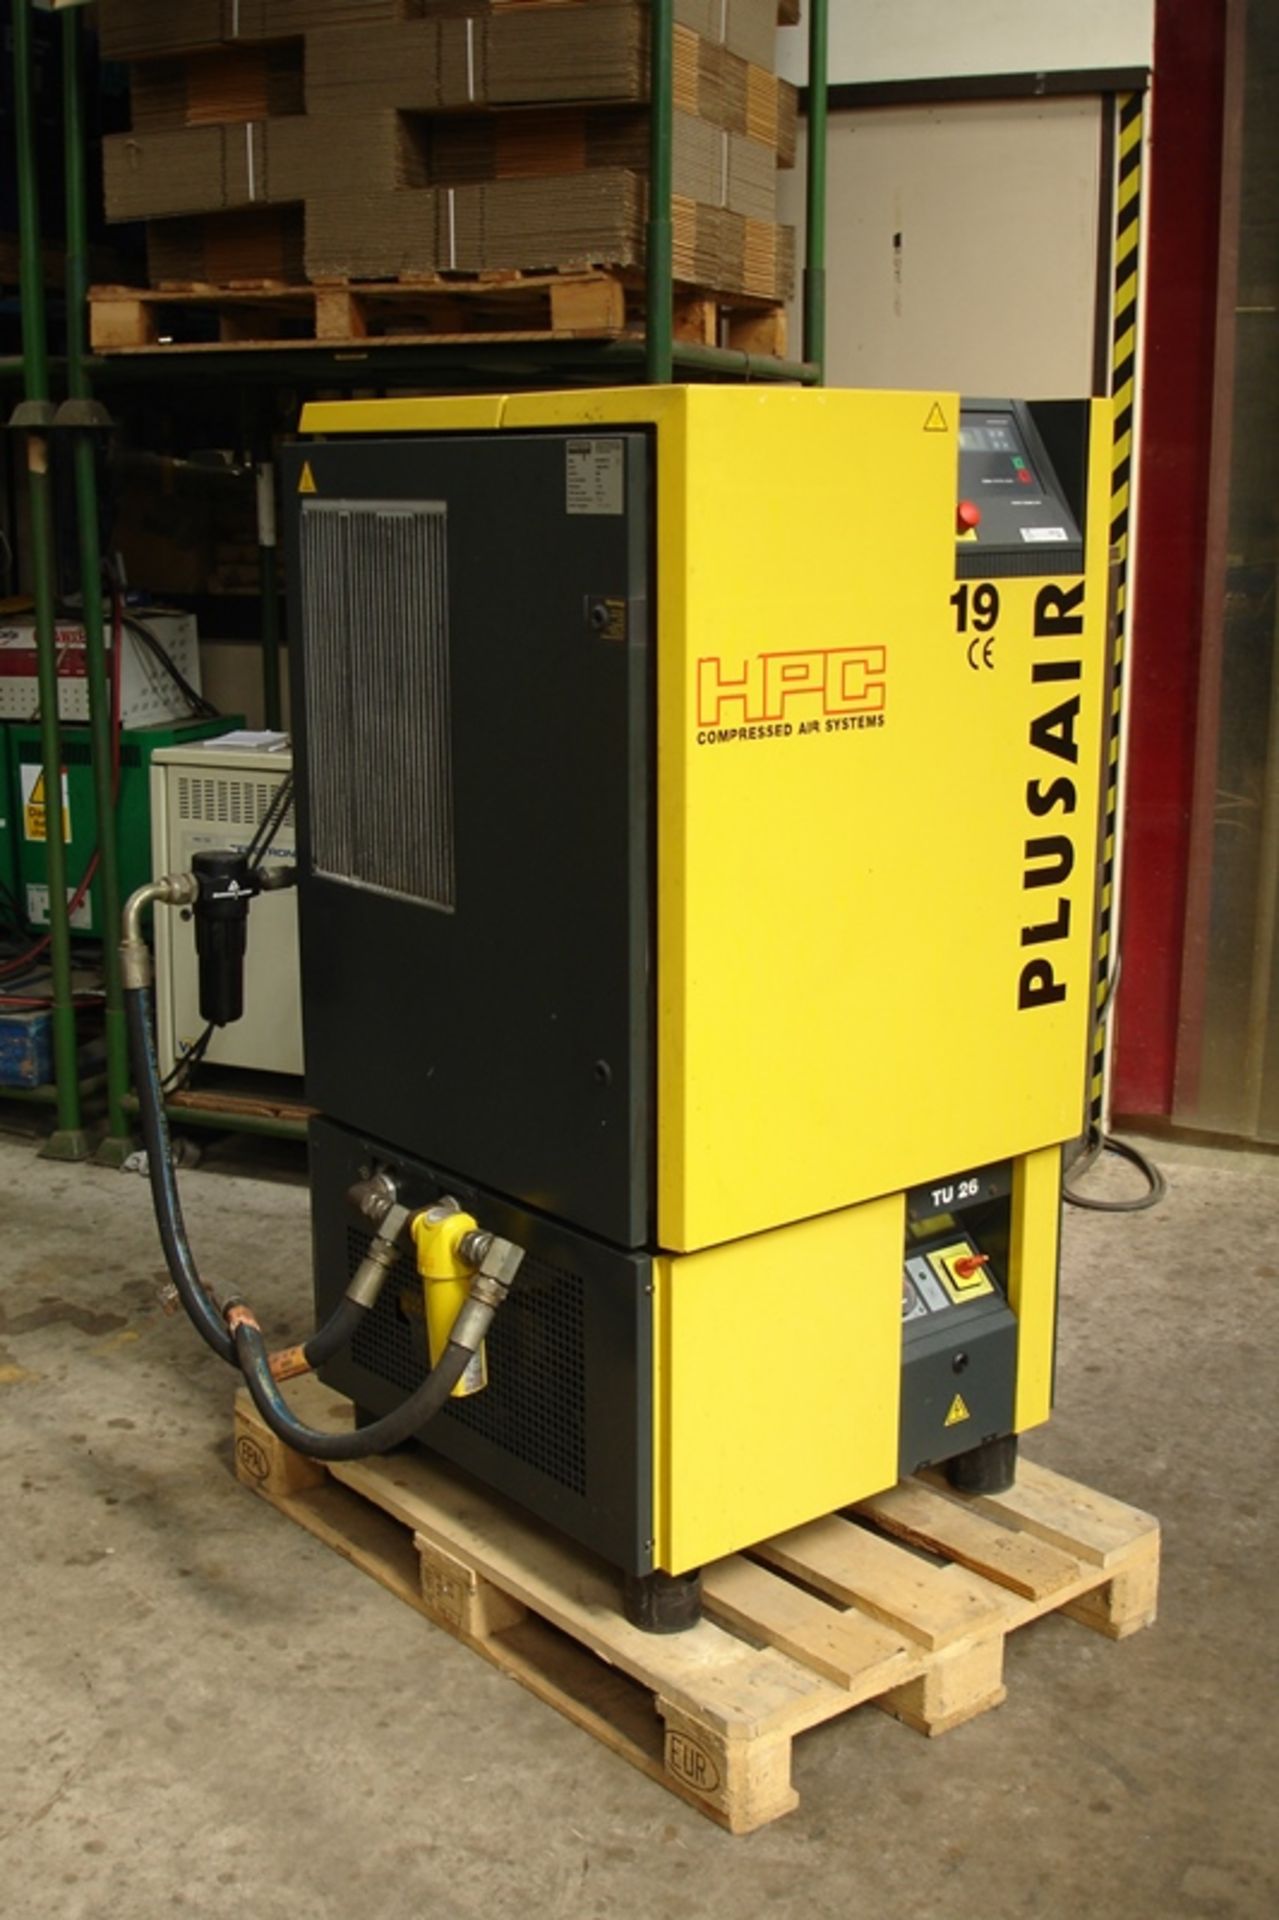 HPC Air Tower compressor/Dryer - Image 2 of 6